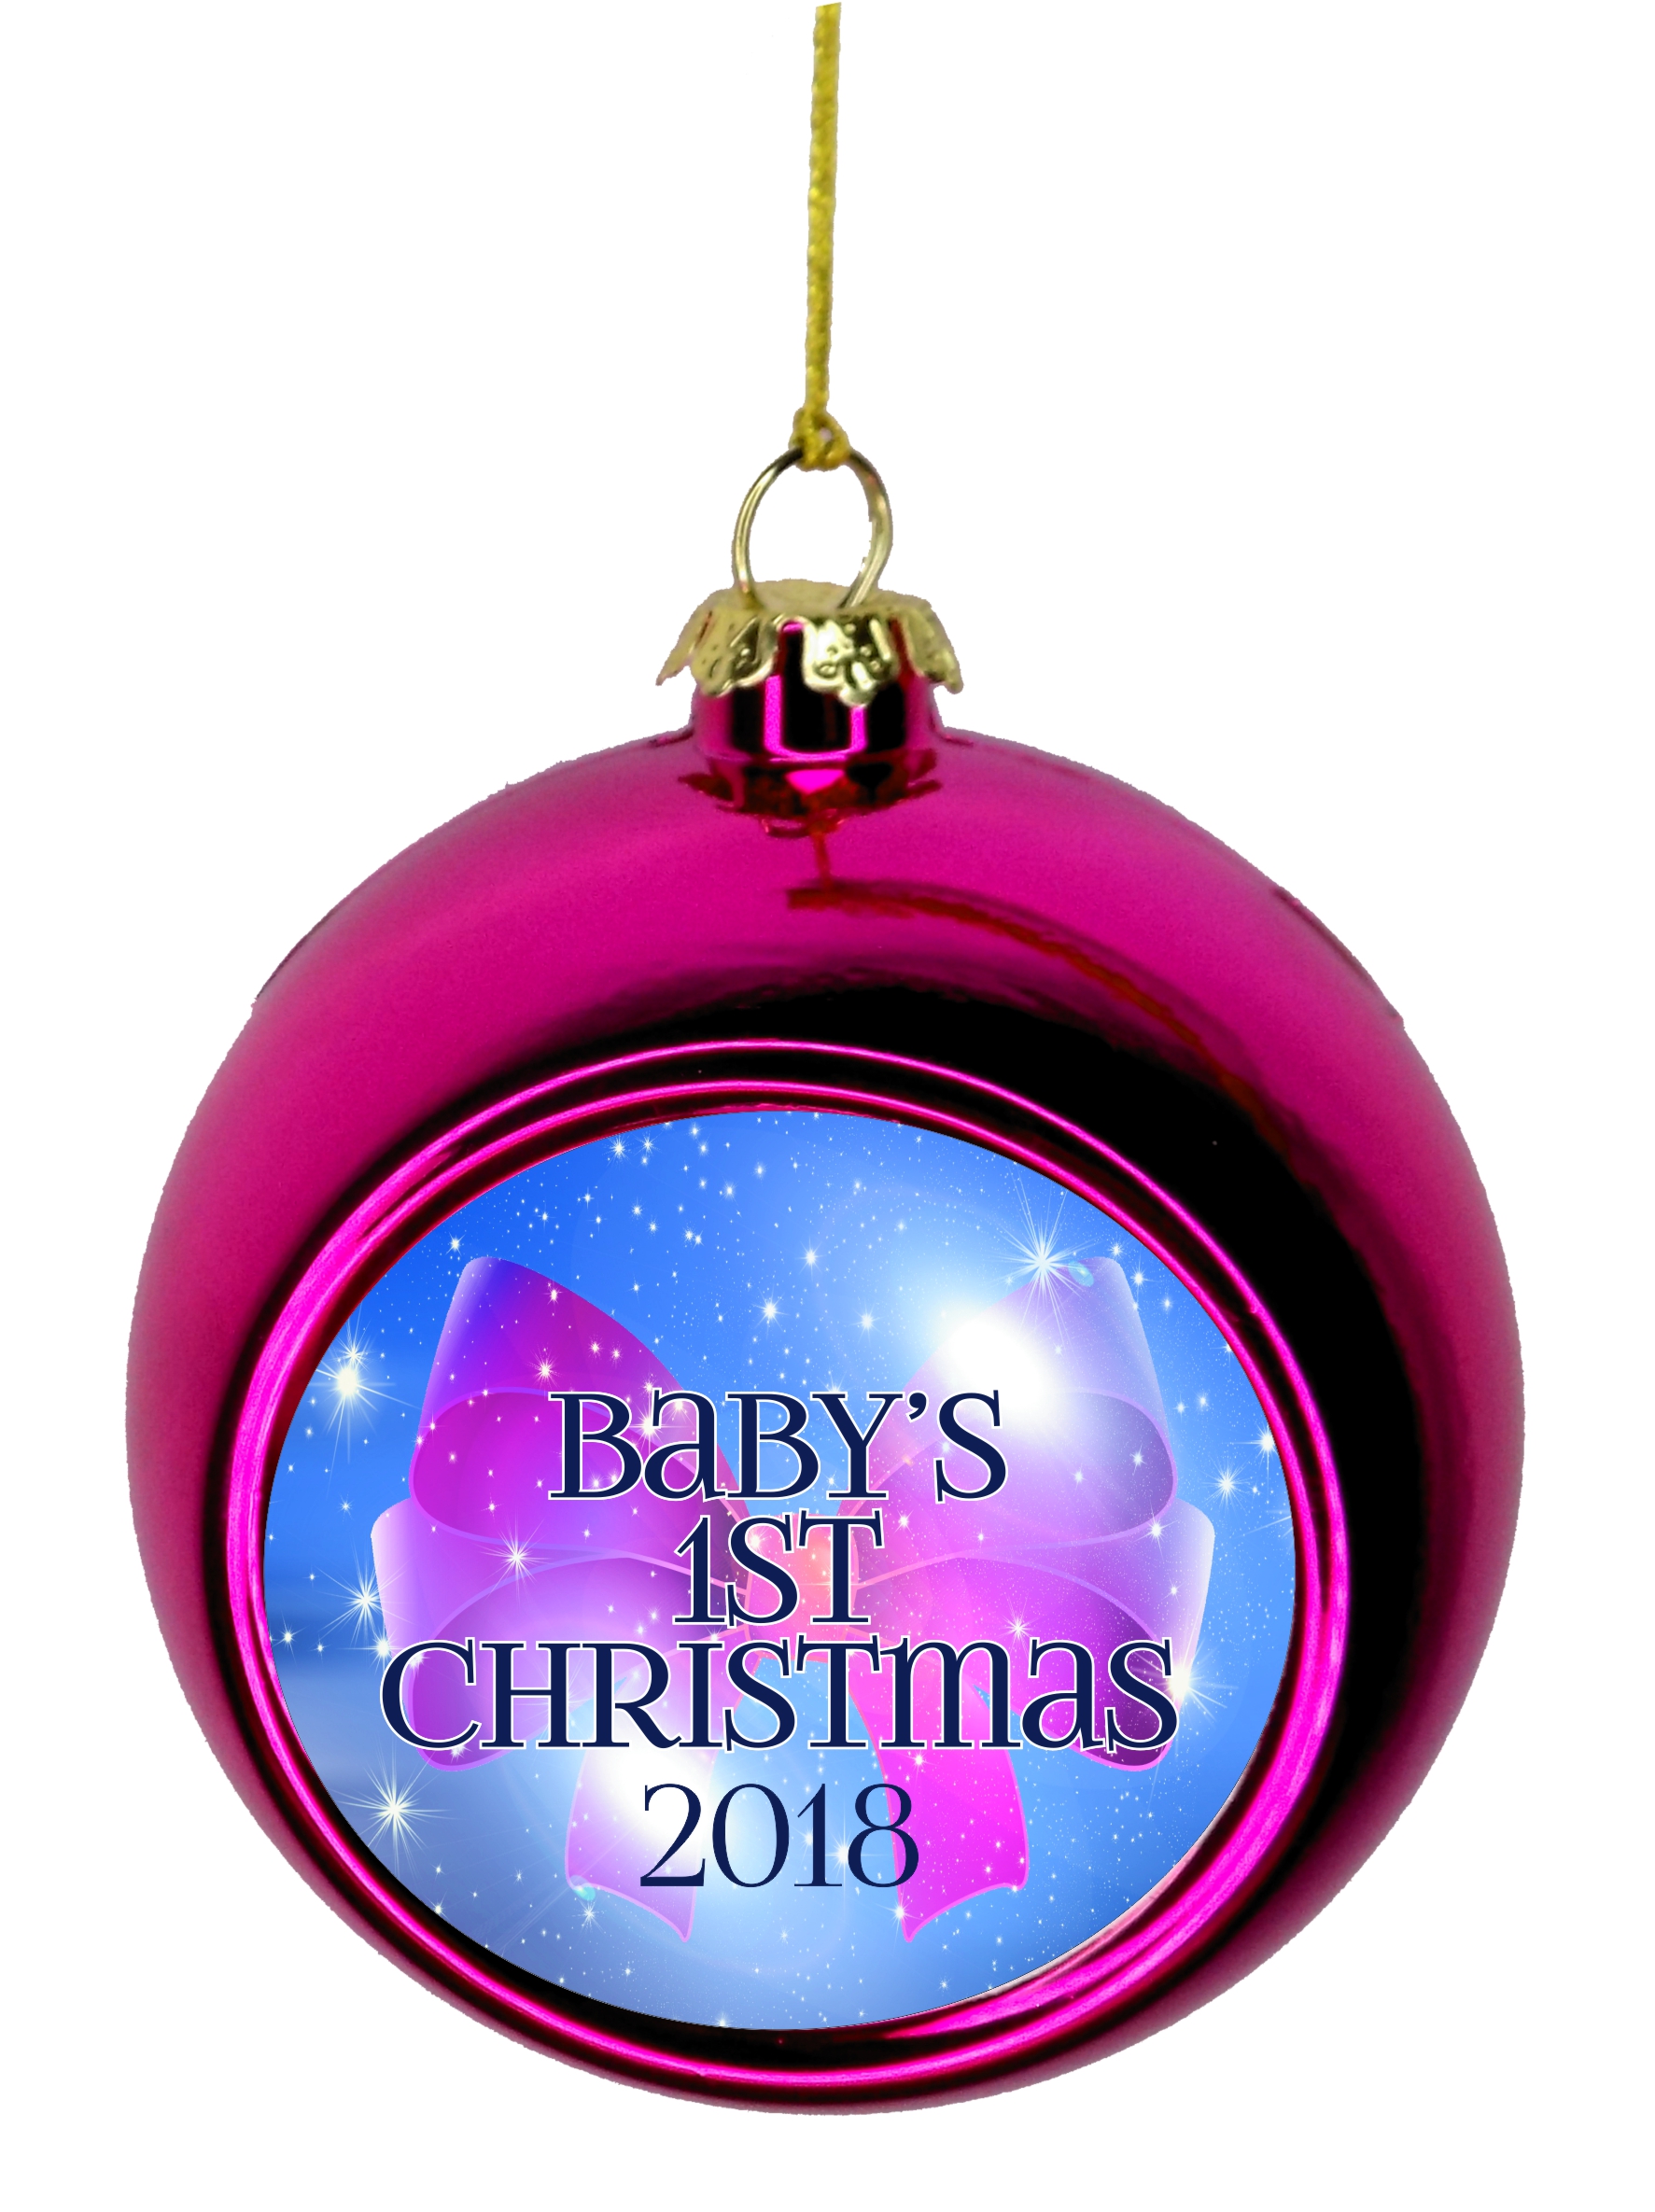 New Baby - Baby's First Christmas 2018 Ornament - Baby Girl Bow Christmas Ornaments Pink Bauble Christmas Ornament Balls - image 1 of 1